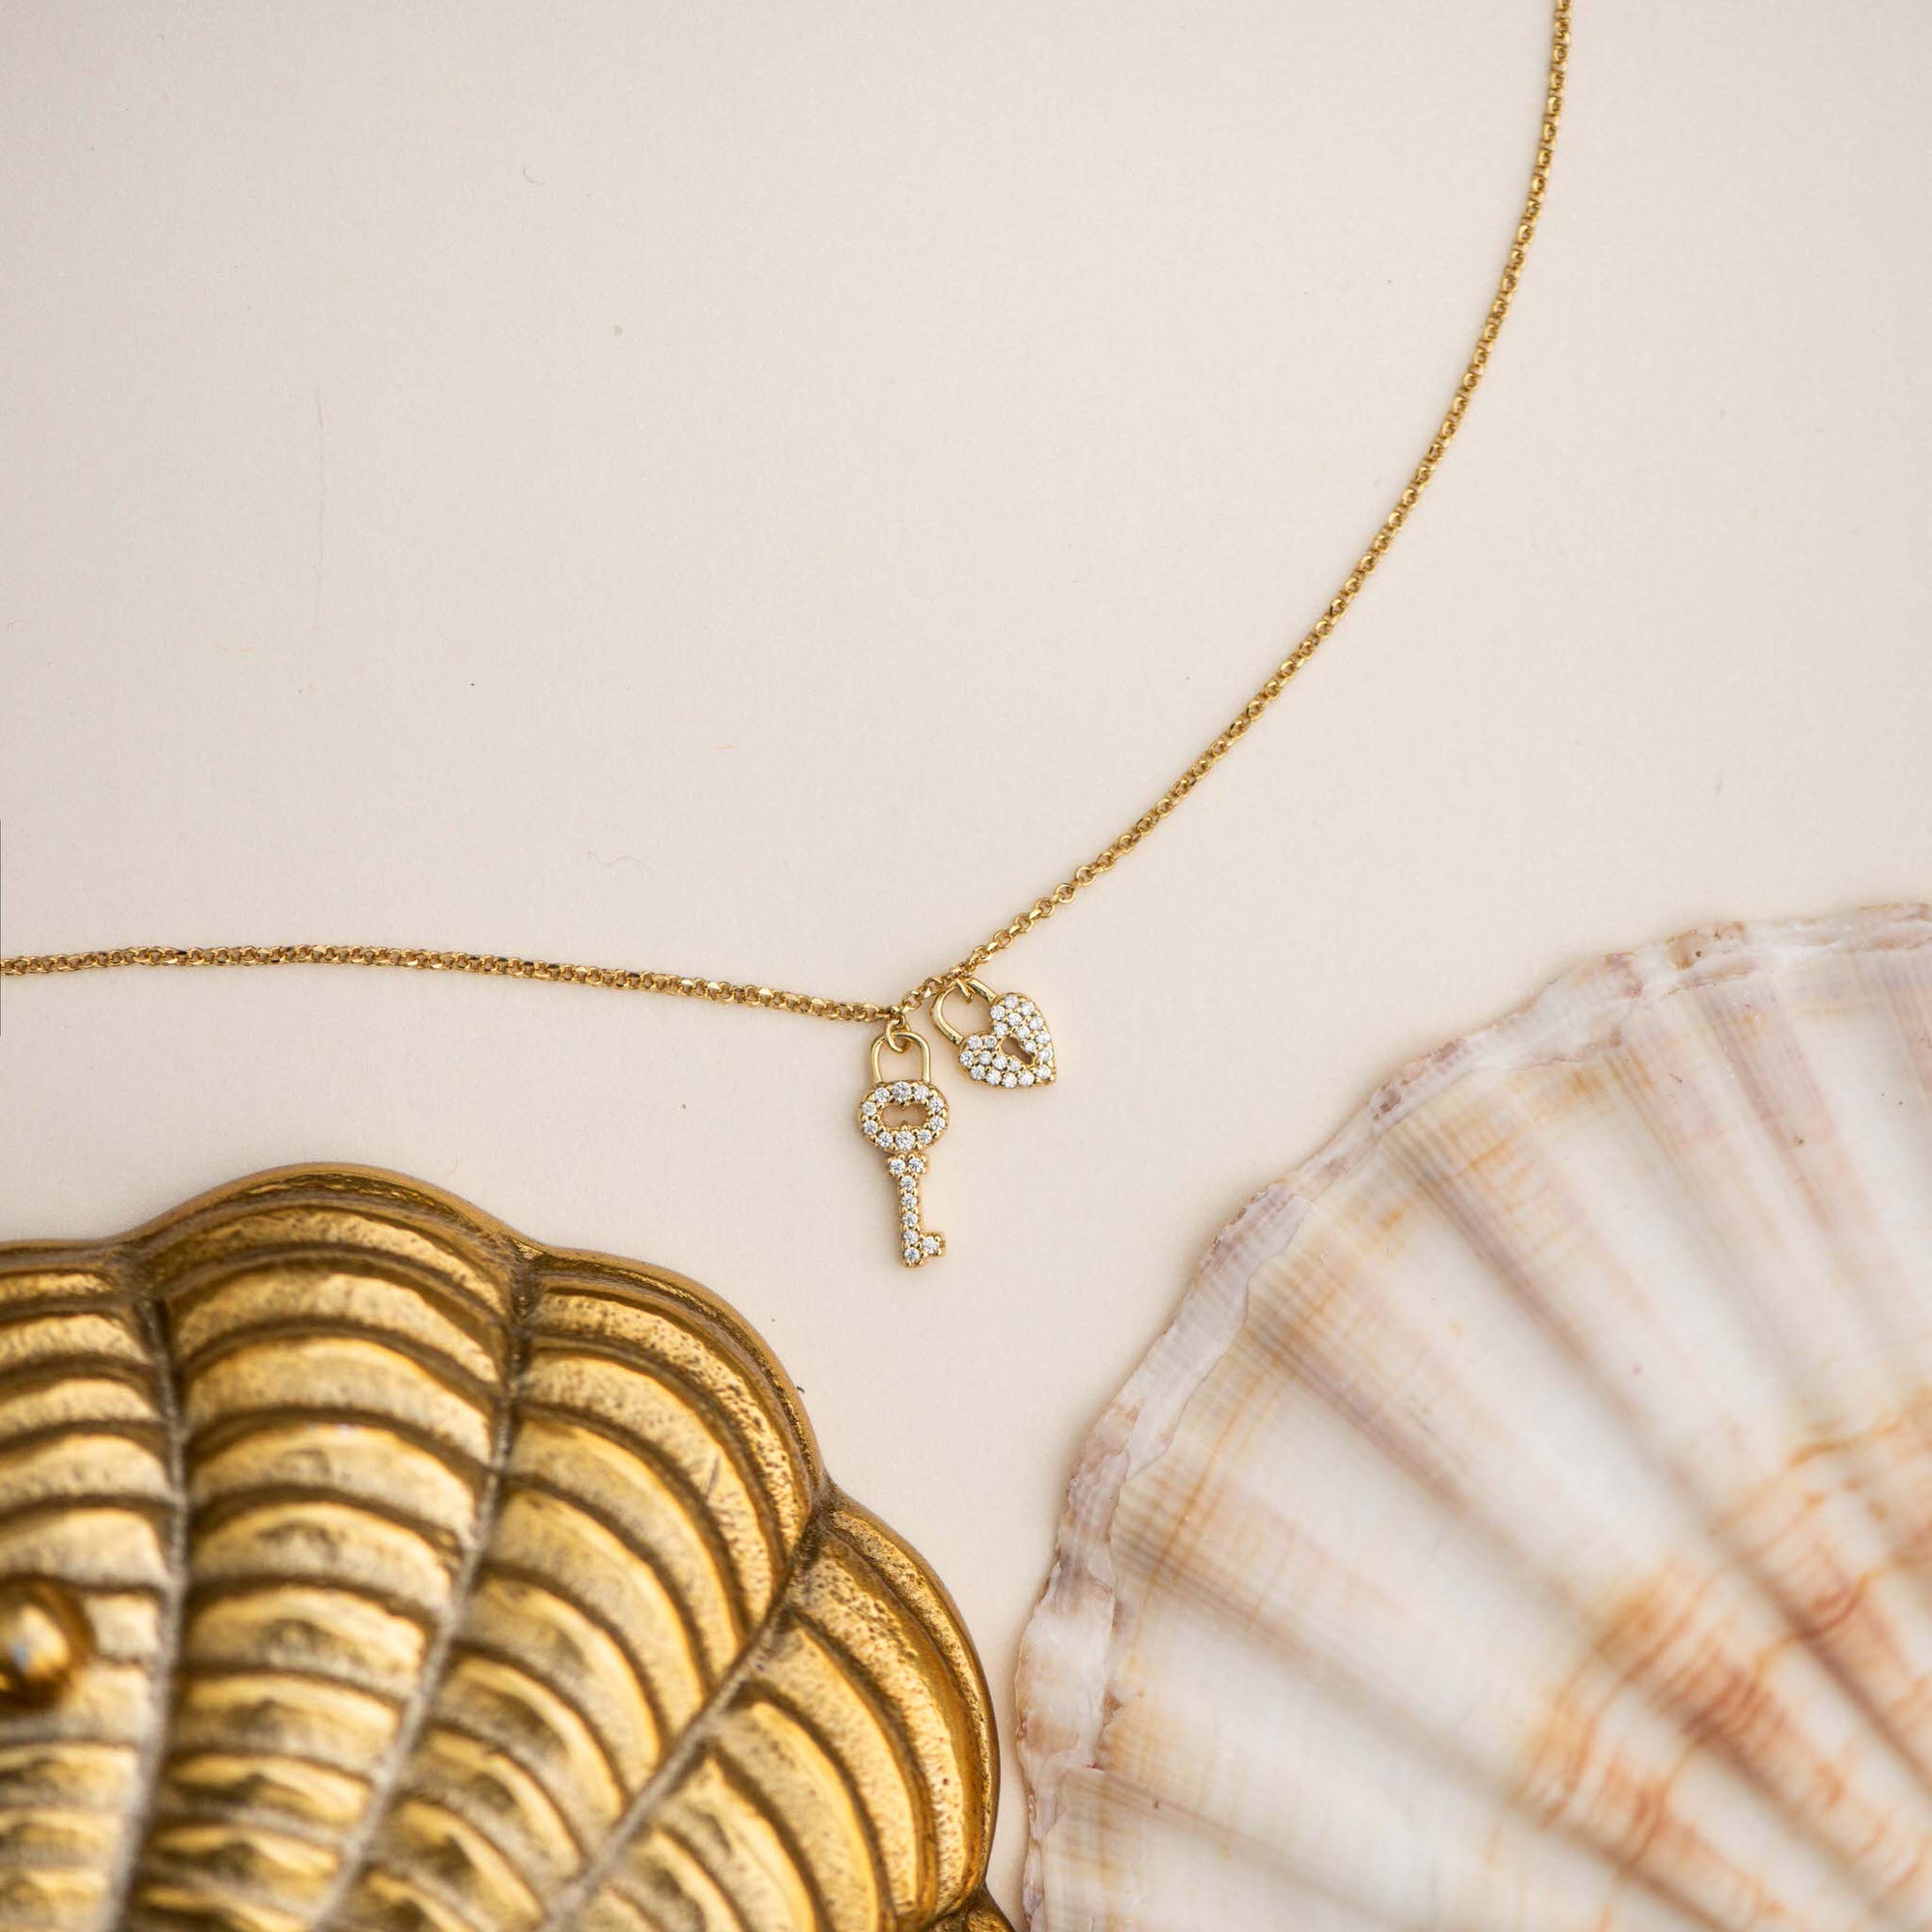 Love & Romance inspires plenty of AVILIO London’s design. Handmade from 925 Sterling Silver and carefully plated with 18k gold, this stunning necklace is strung with both a key and a padlock pendant that sits comfortably on your neckline.